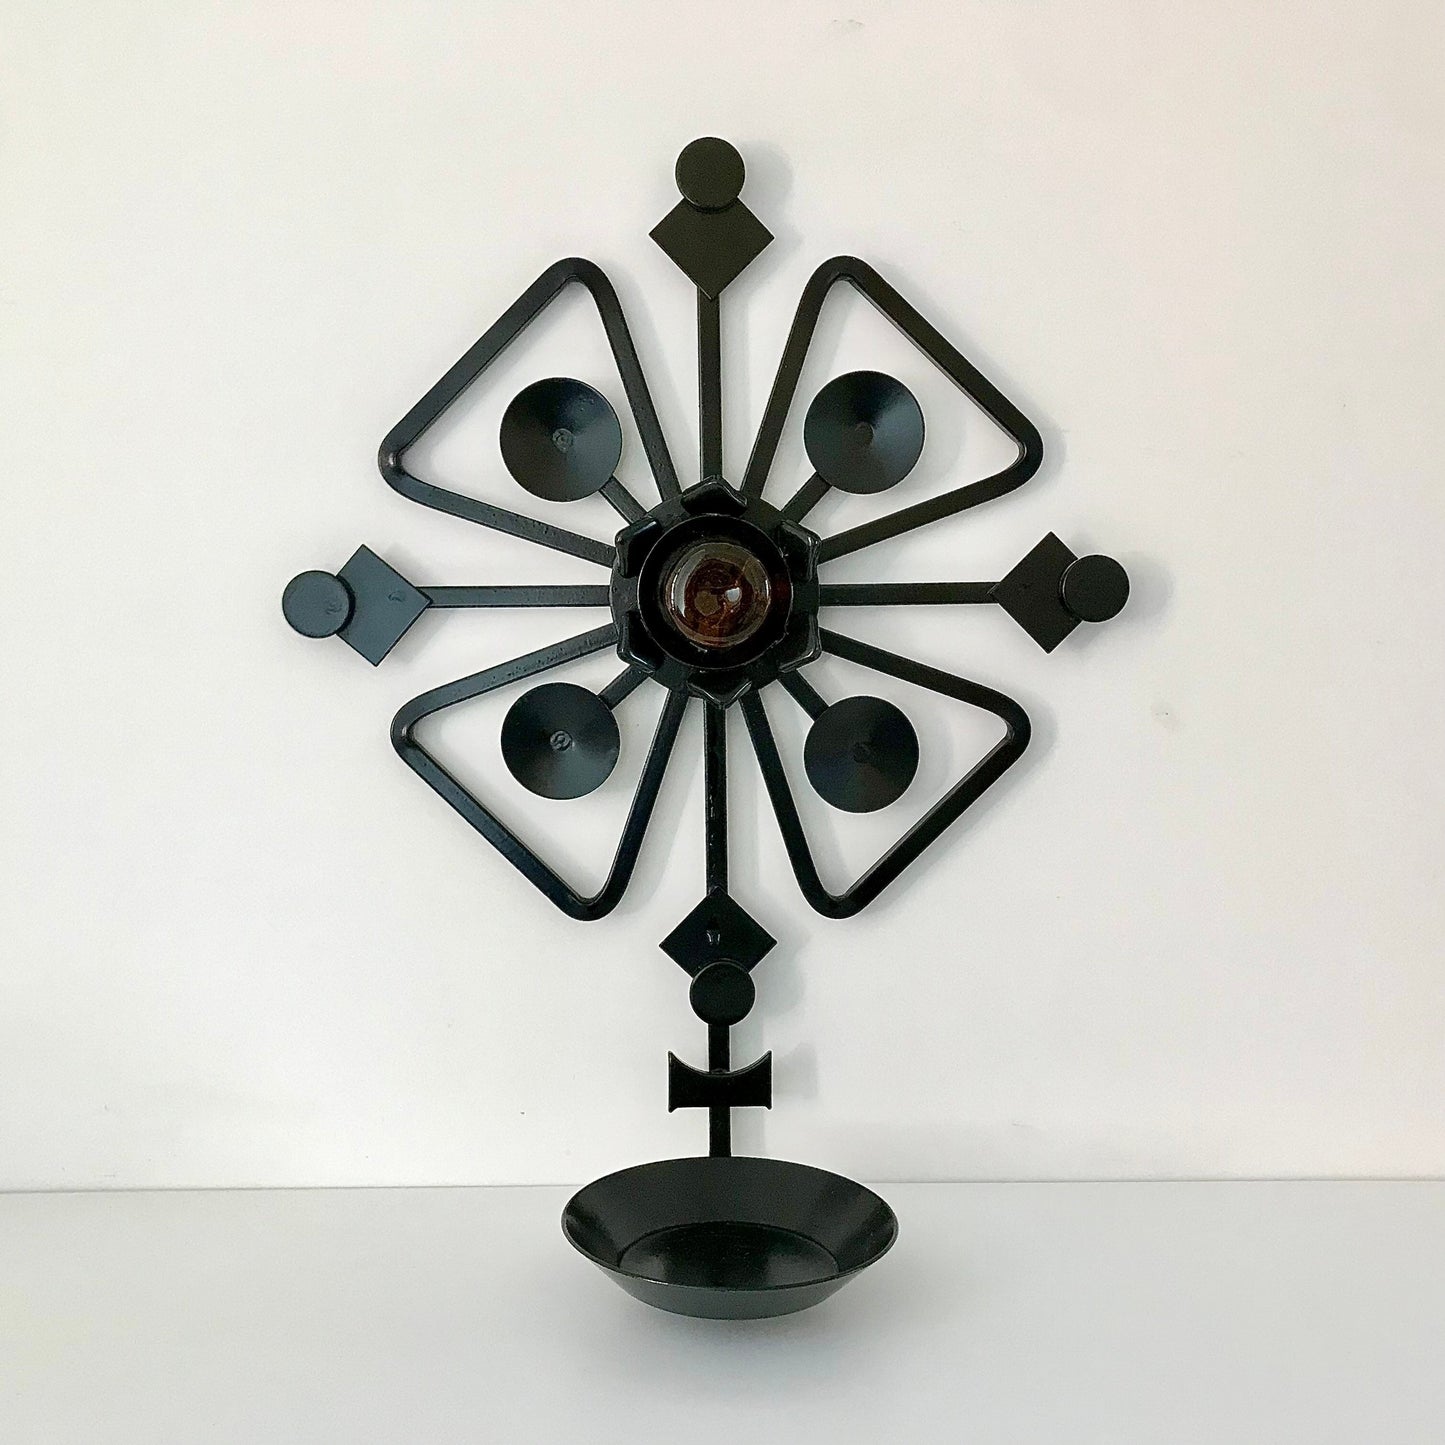 Dantoft Danish Iron Glass Wall Relief Candle Holder Sconce 1960s Brutalist